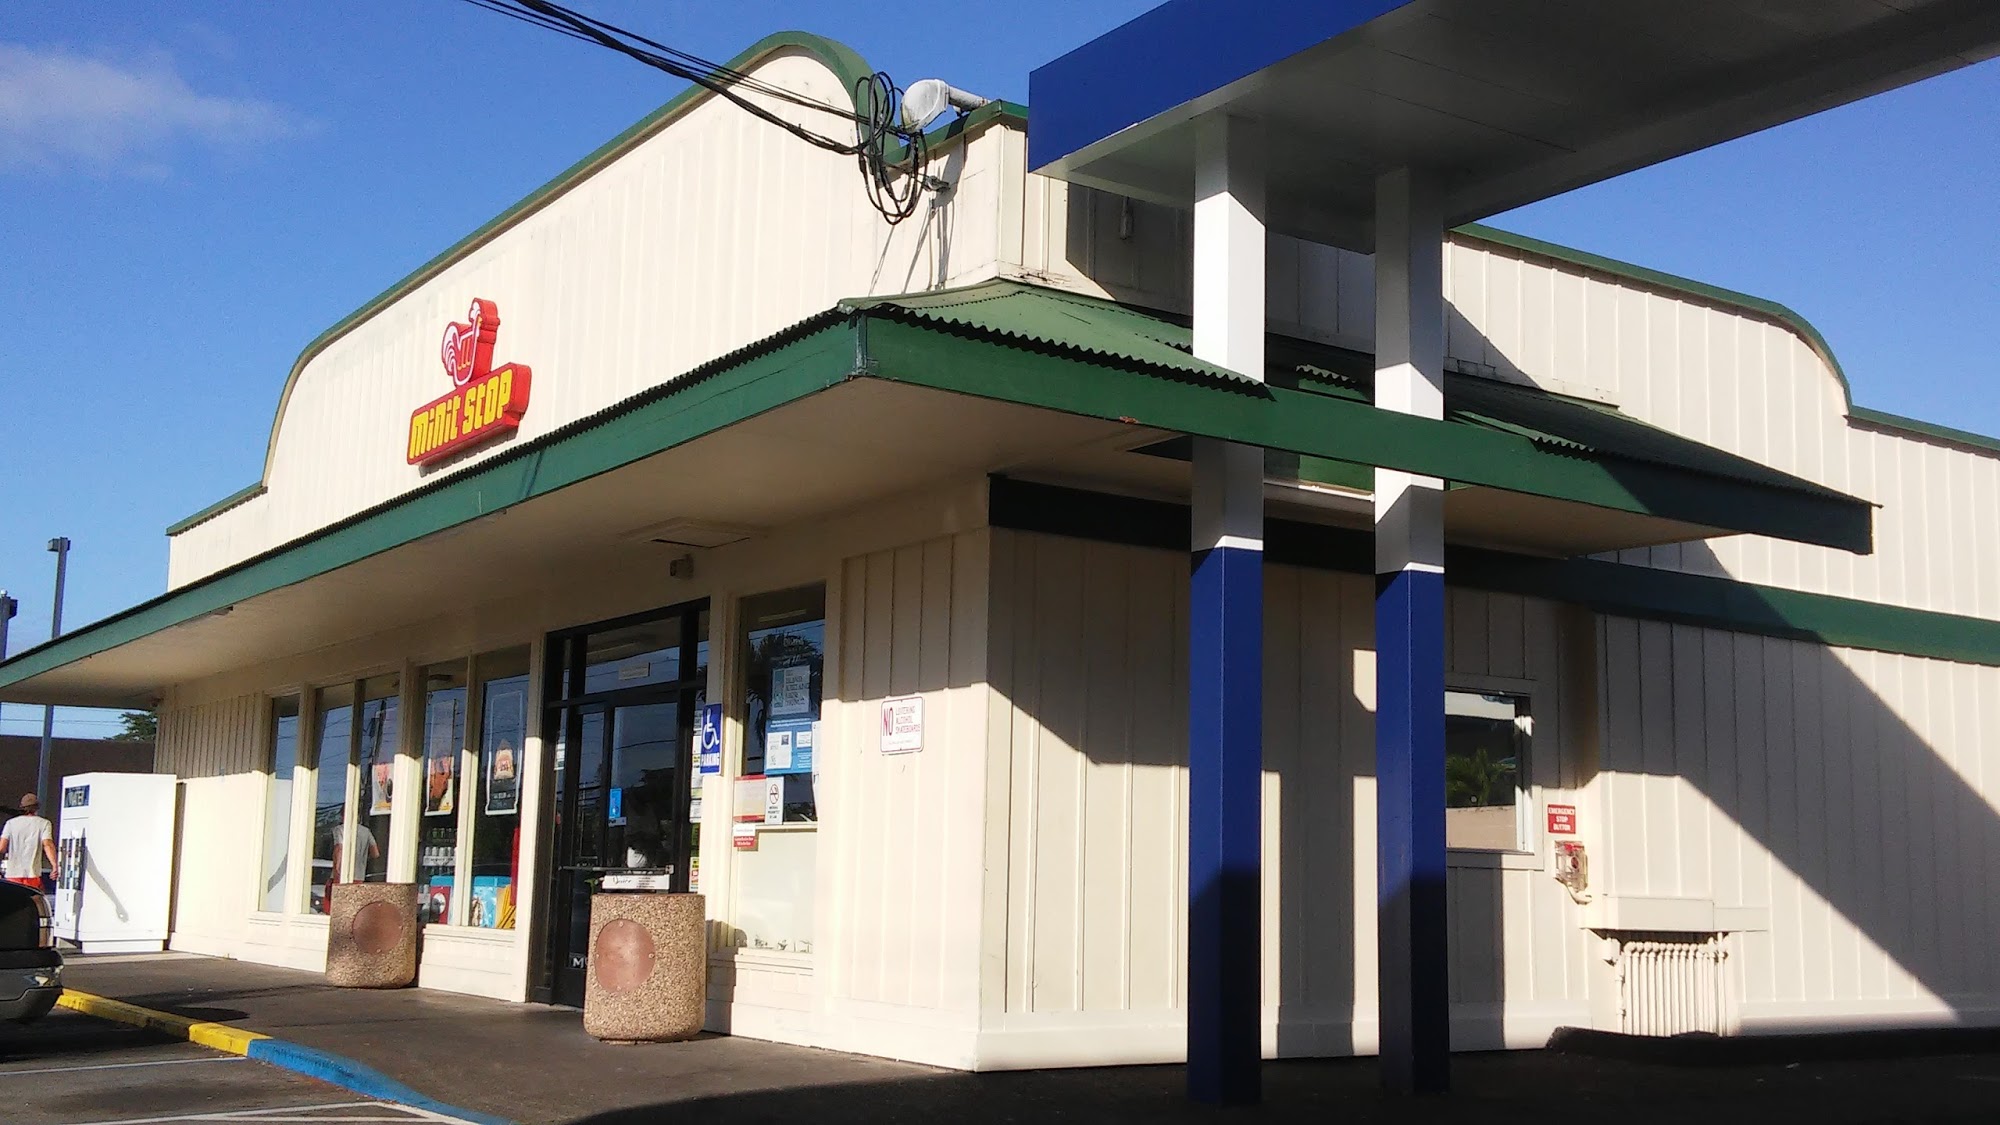 Minit Stop Keaau - Fried Chicken, Convenience Store and Gas Station